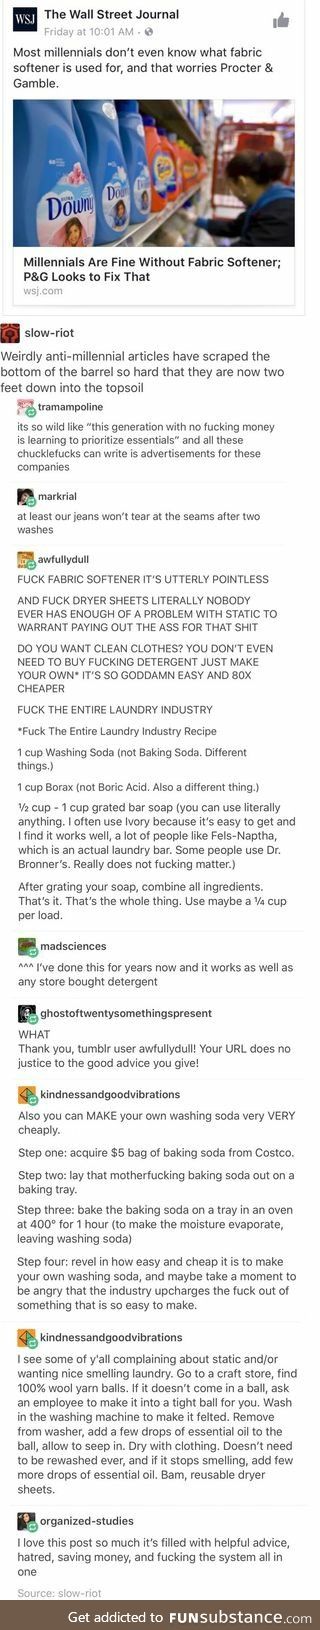 Laundry Soap for millenials